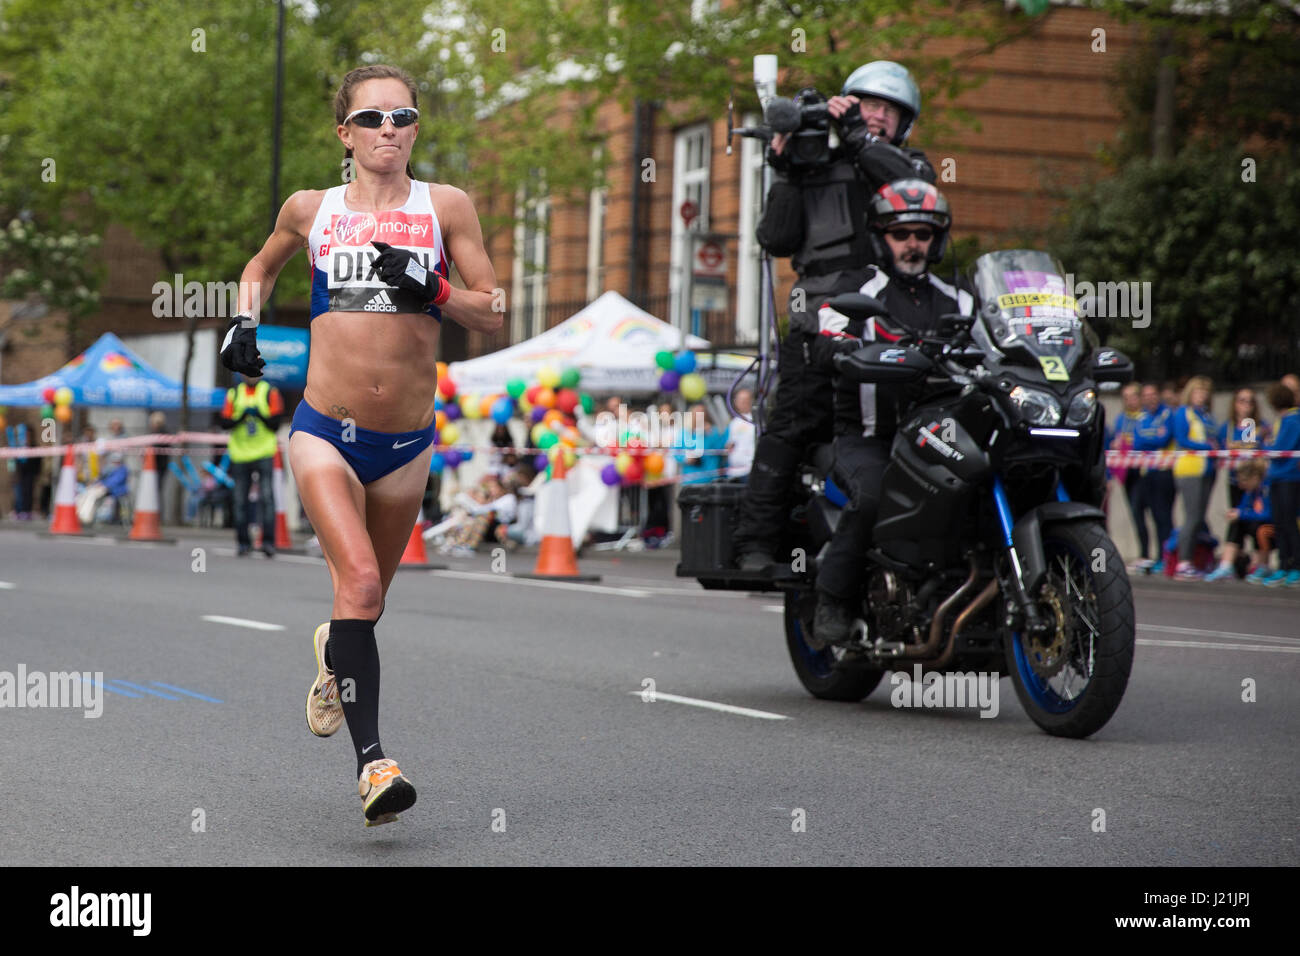 London, UK. 23rd April, 2017. Alyson Dixon of Great Britain, who finished 14th in the women's event, runs through Shadwell close to the halfway point of the 2017 Virgin Money London Marathon. Credit: Mark Kerrison/Alamy Live News Stock Photo